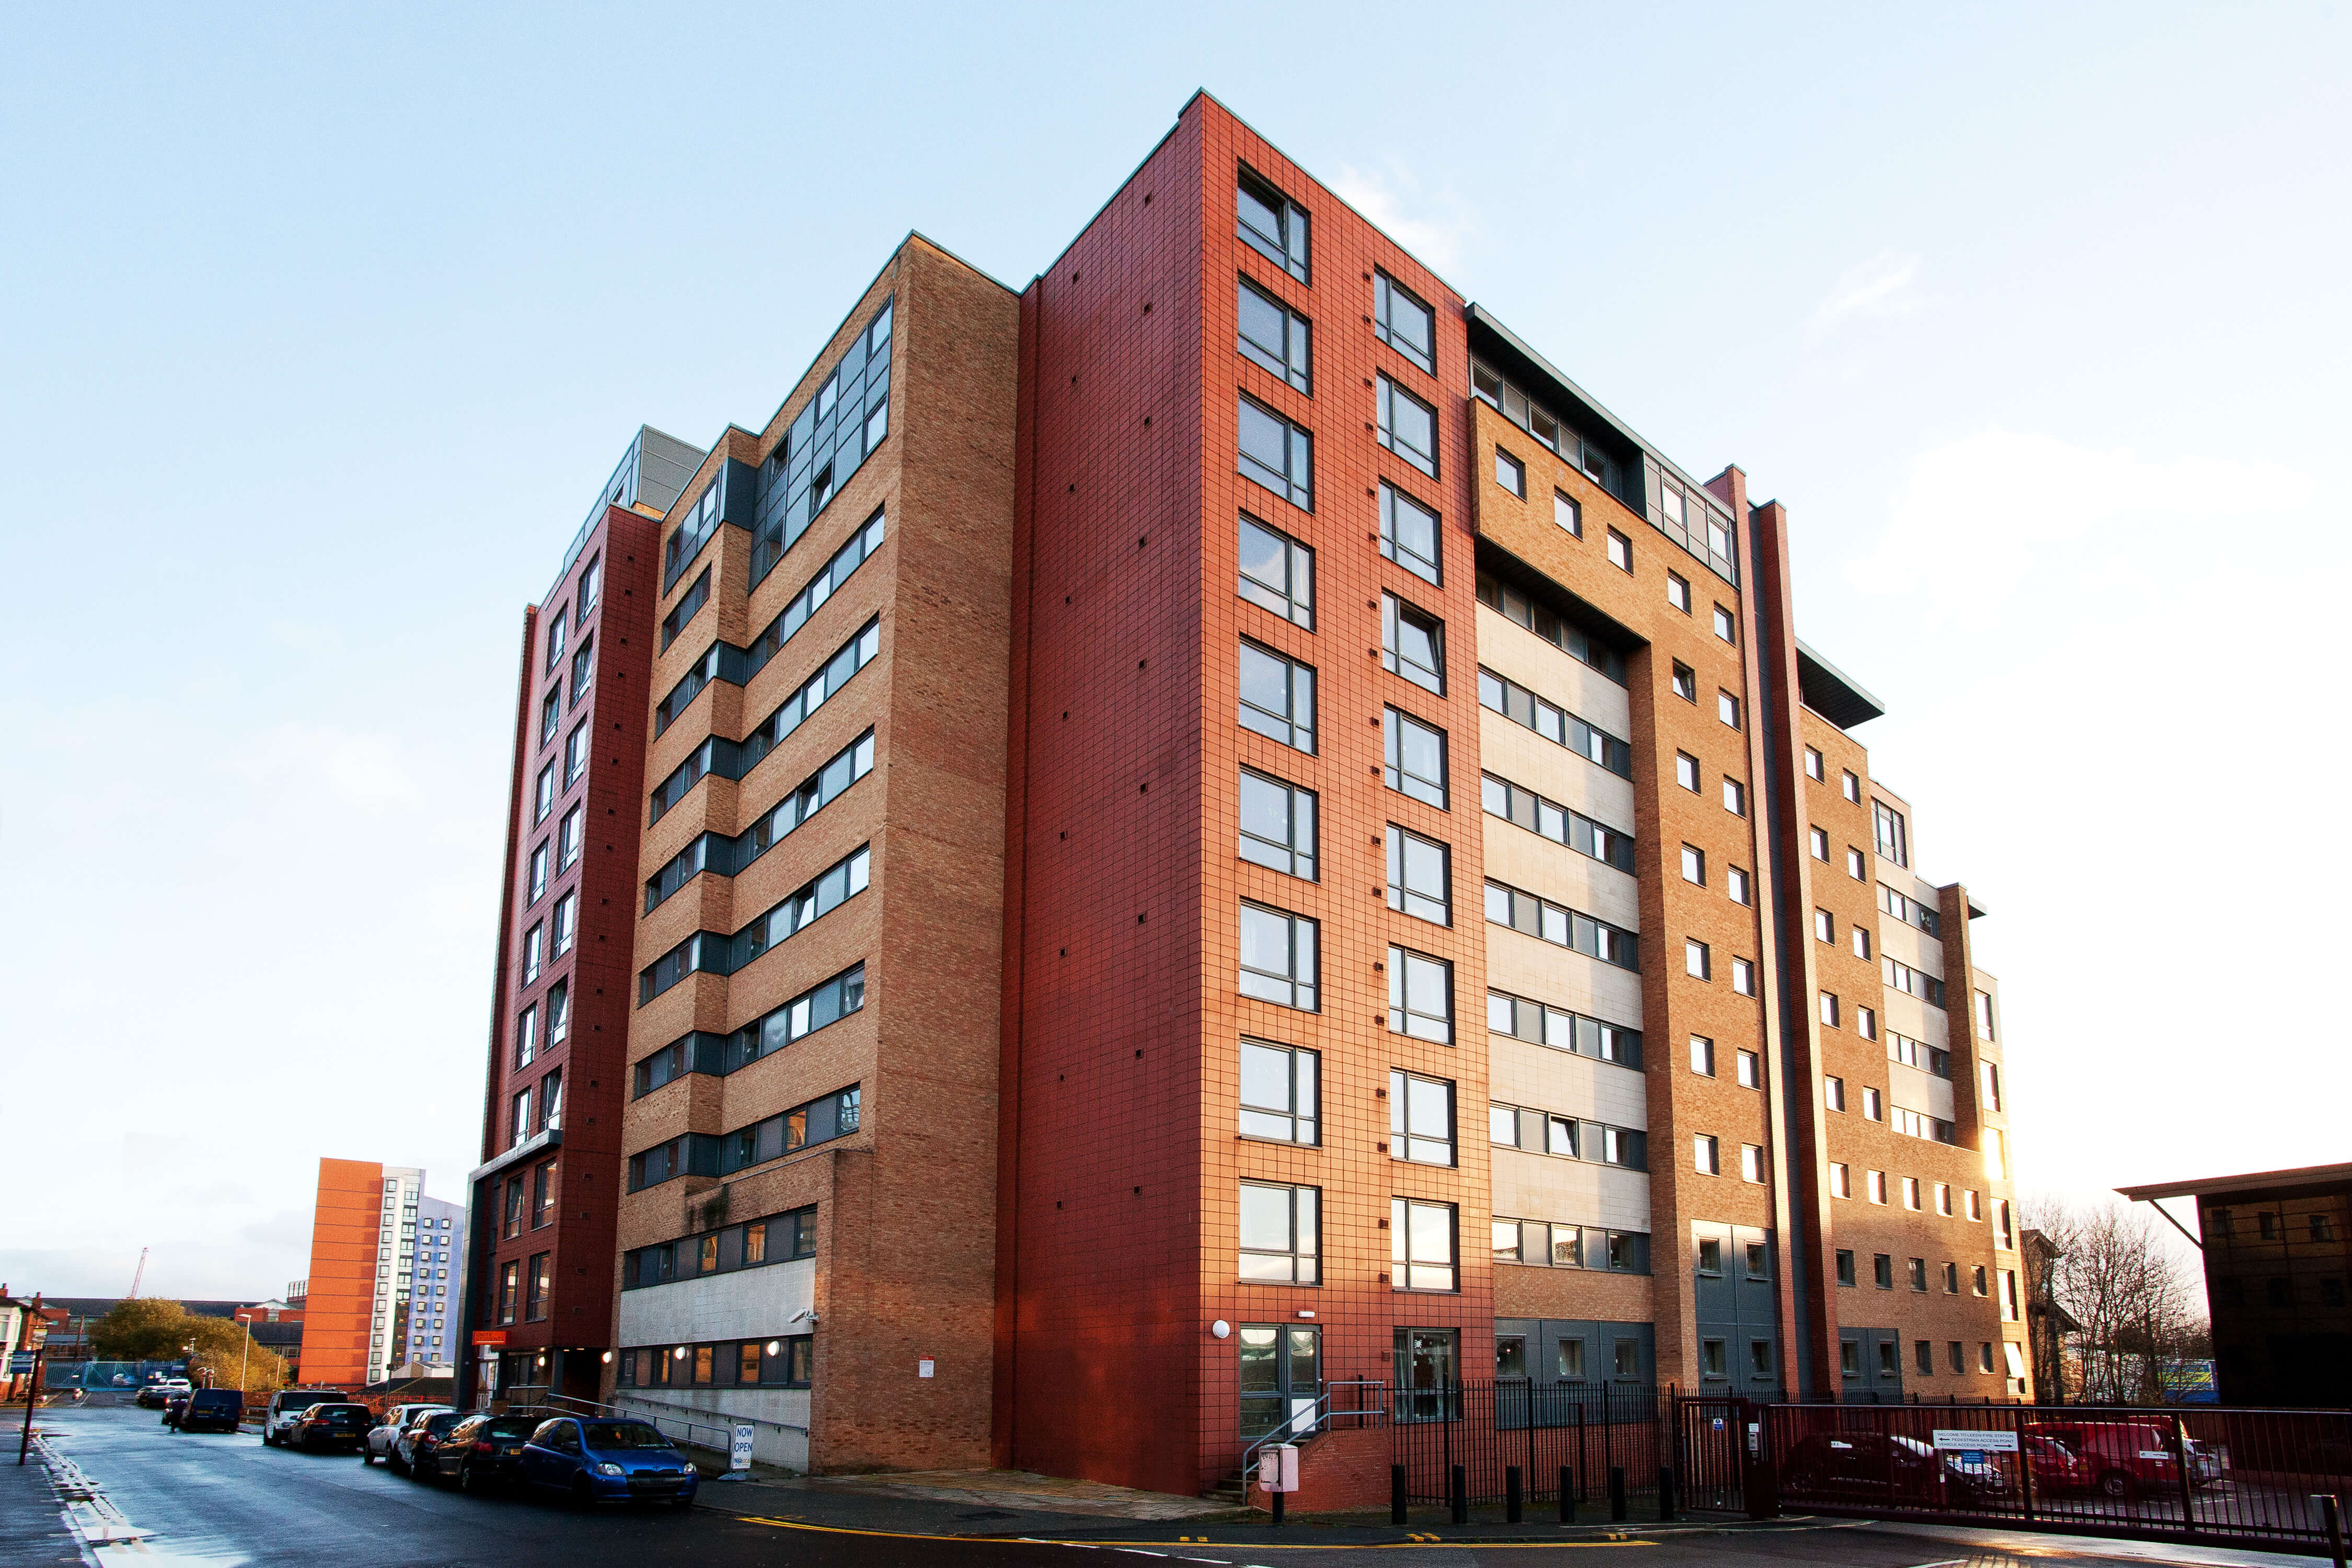 Unite Students accommodation at The Tannery in Leeds